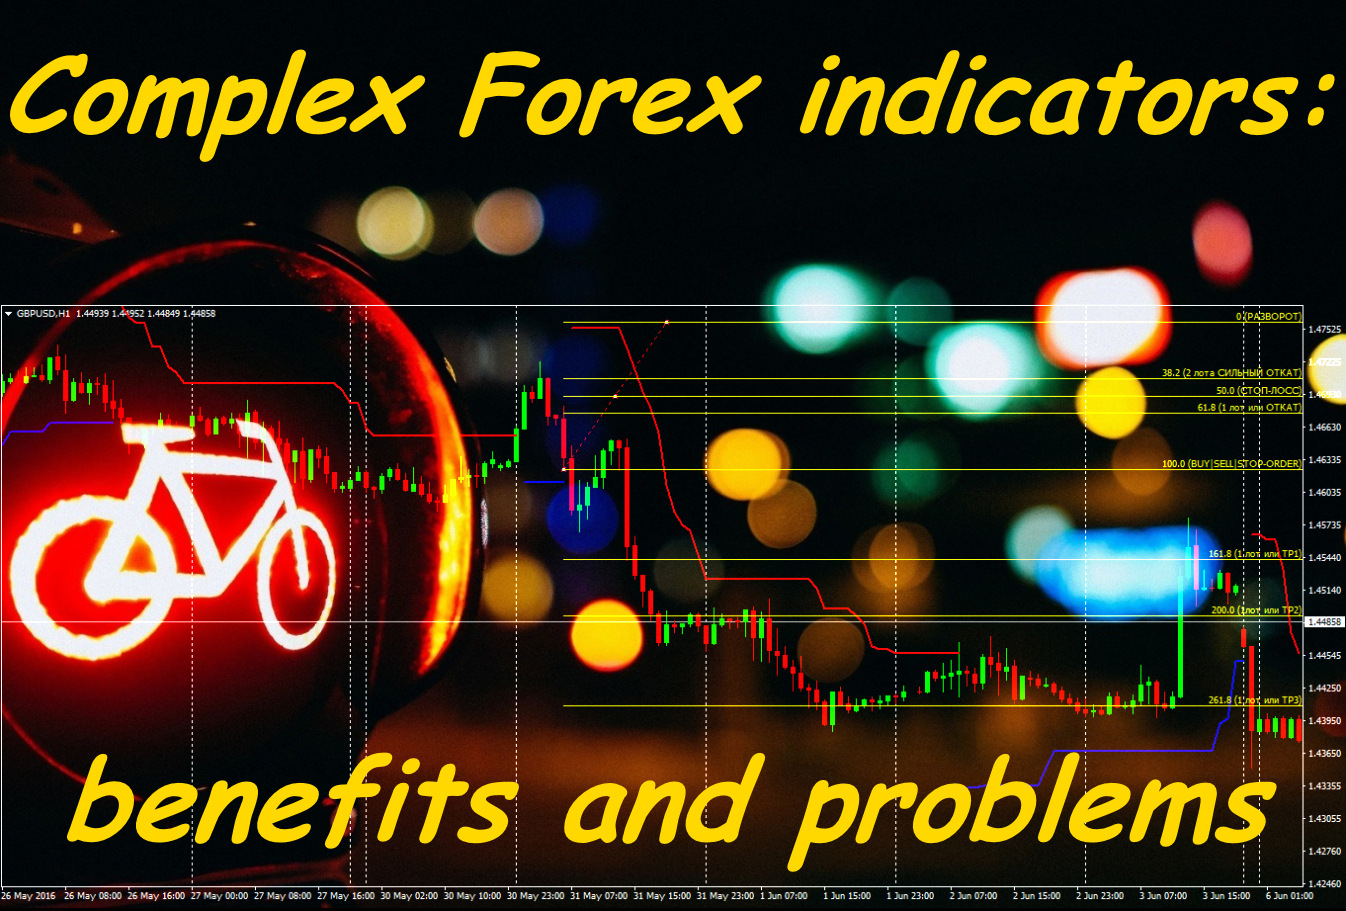 Complex Forex indicators benefits and problems Forex